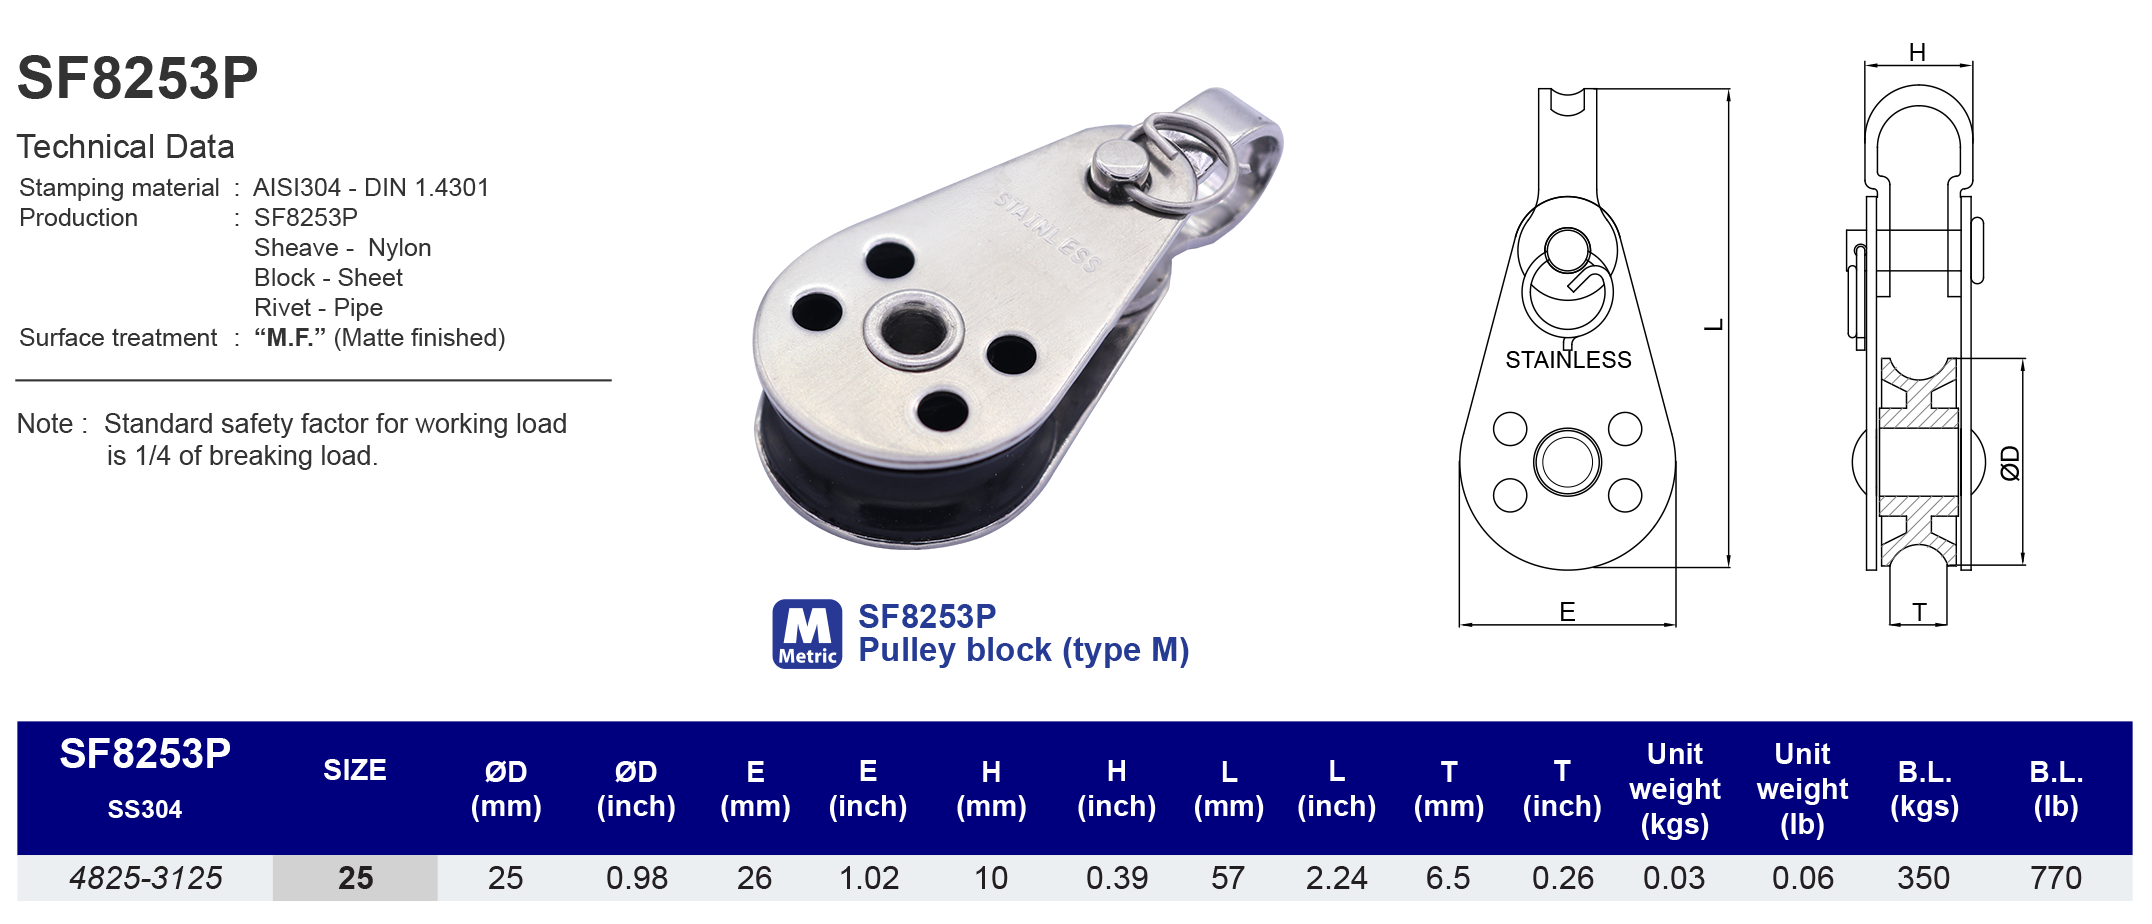 SF8253P Pulley block (type M) - 304